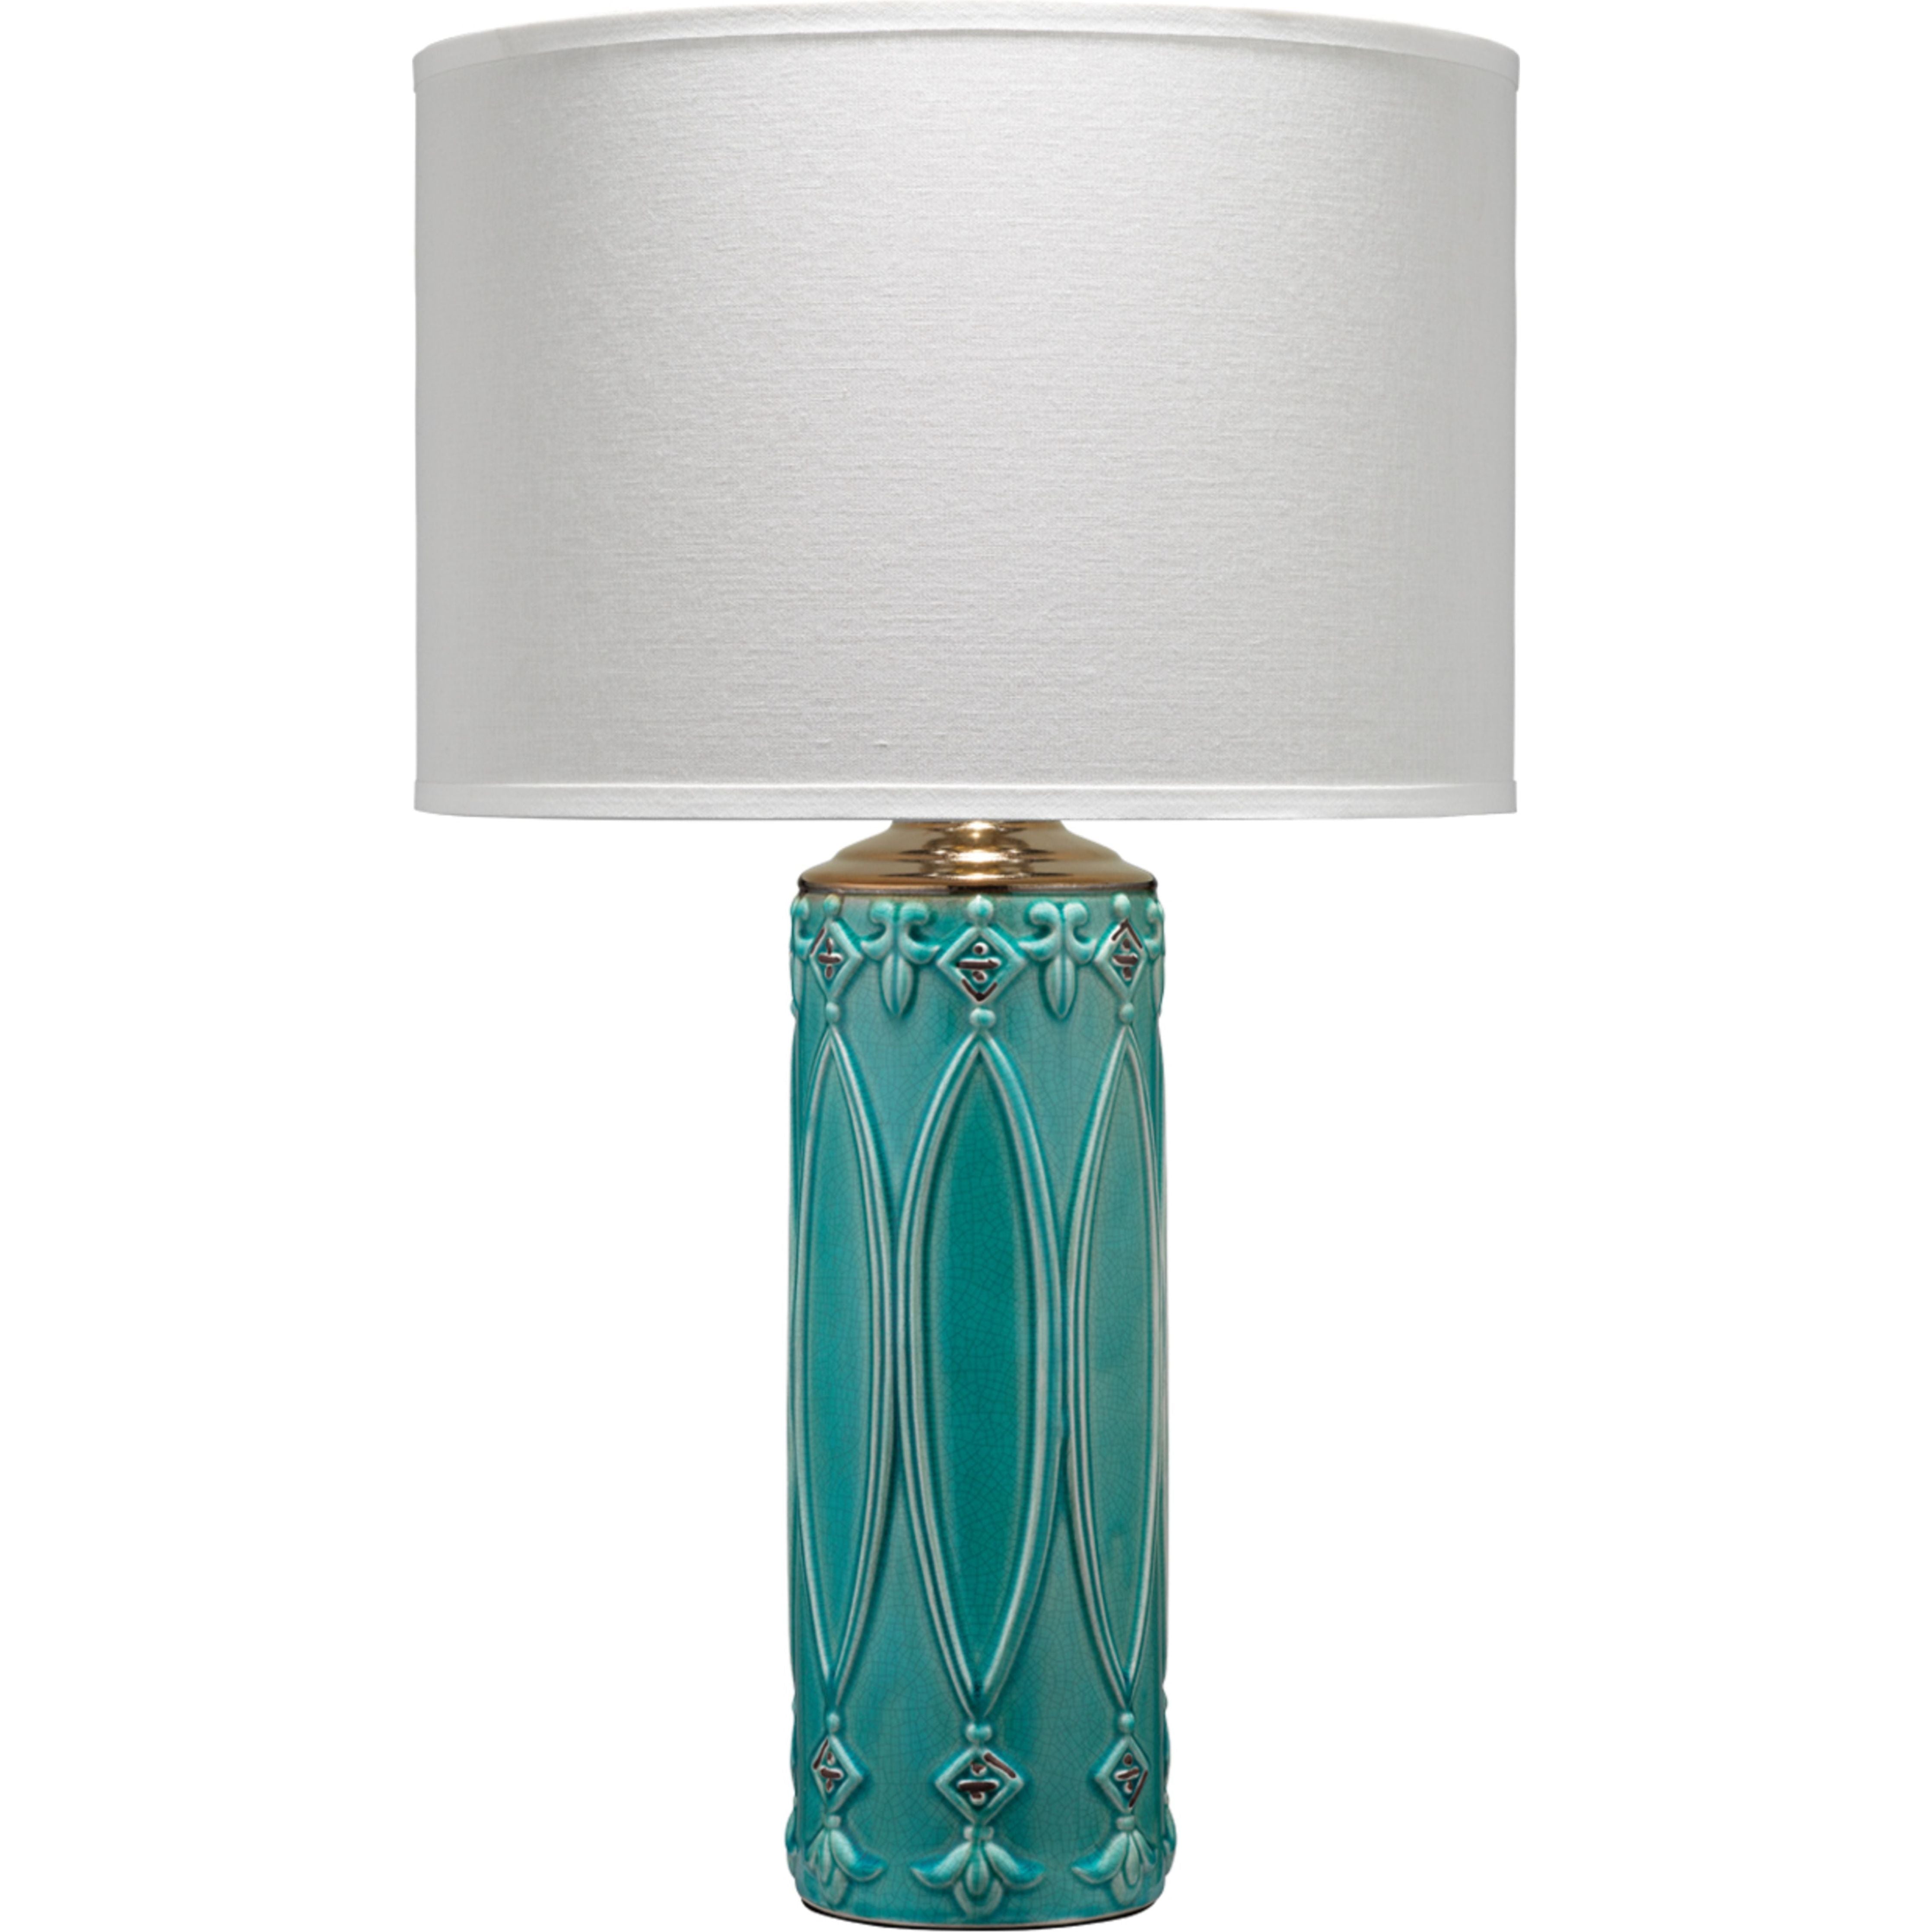 Jamie Young Company - BL616-TL32 - Tabitha Table Lamp -  - Turquoise